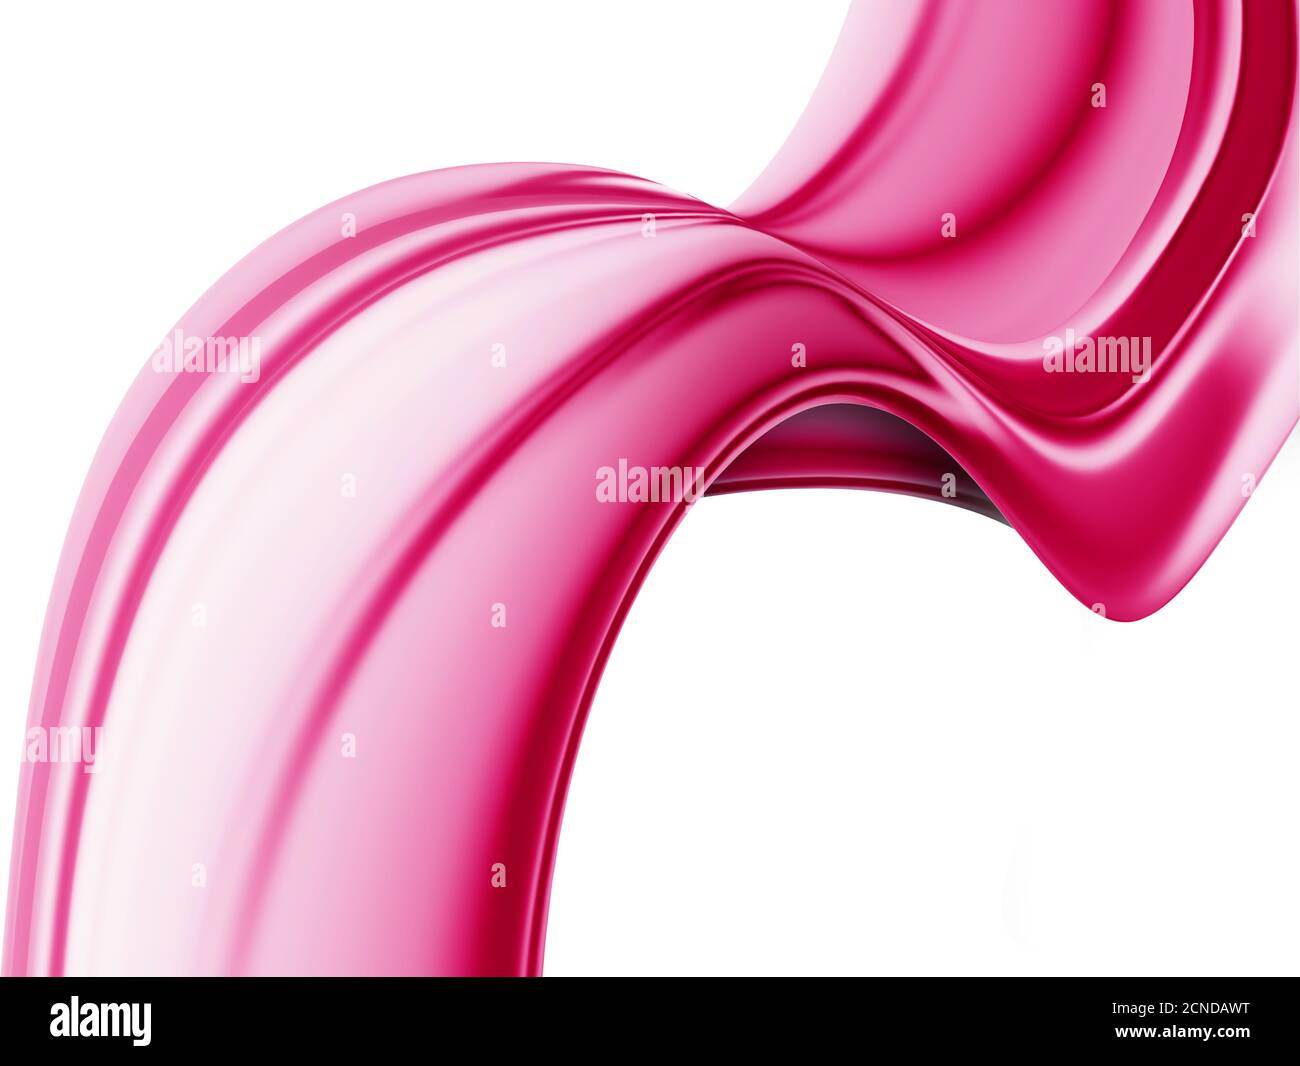 candy wave Stock Photo